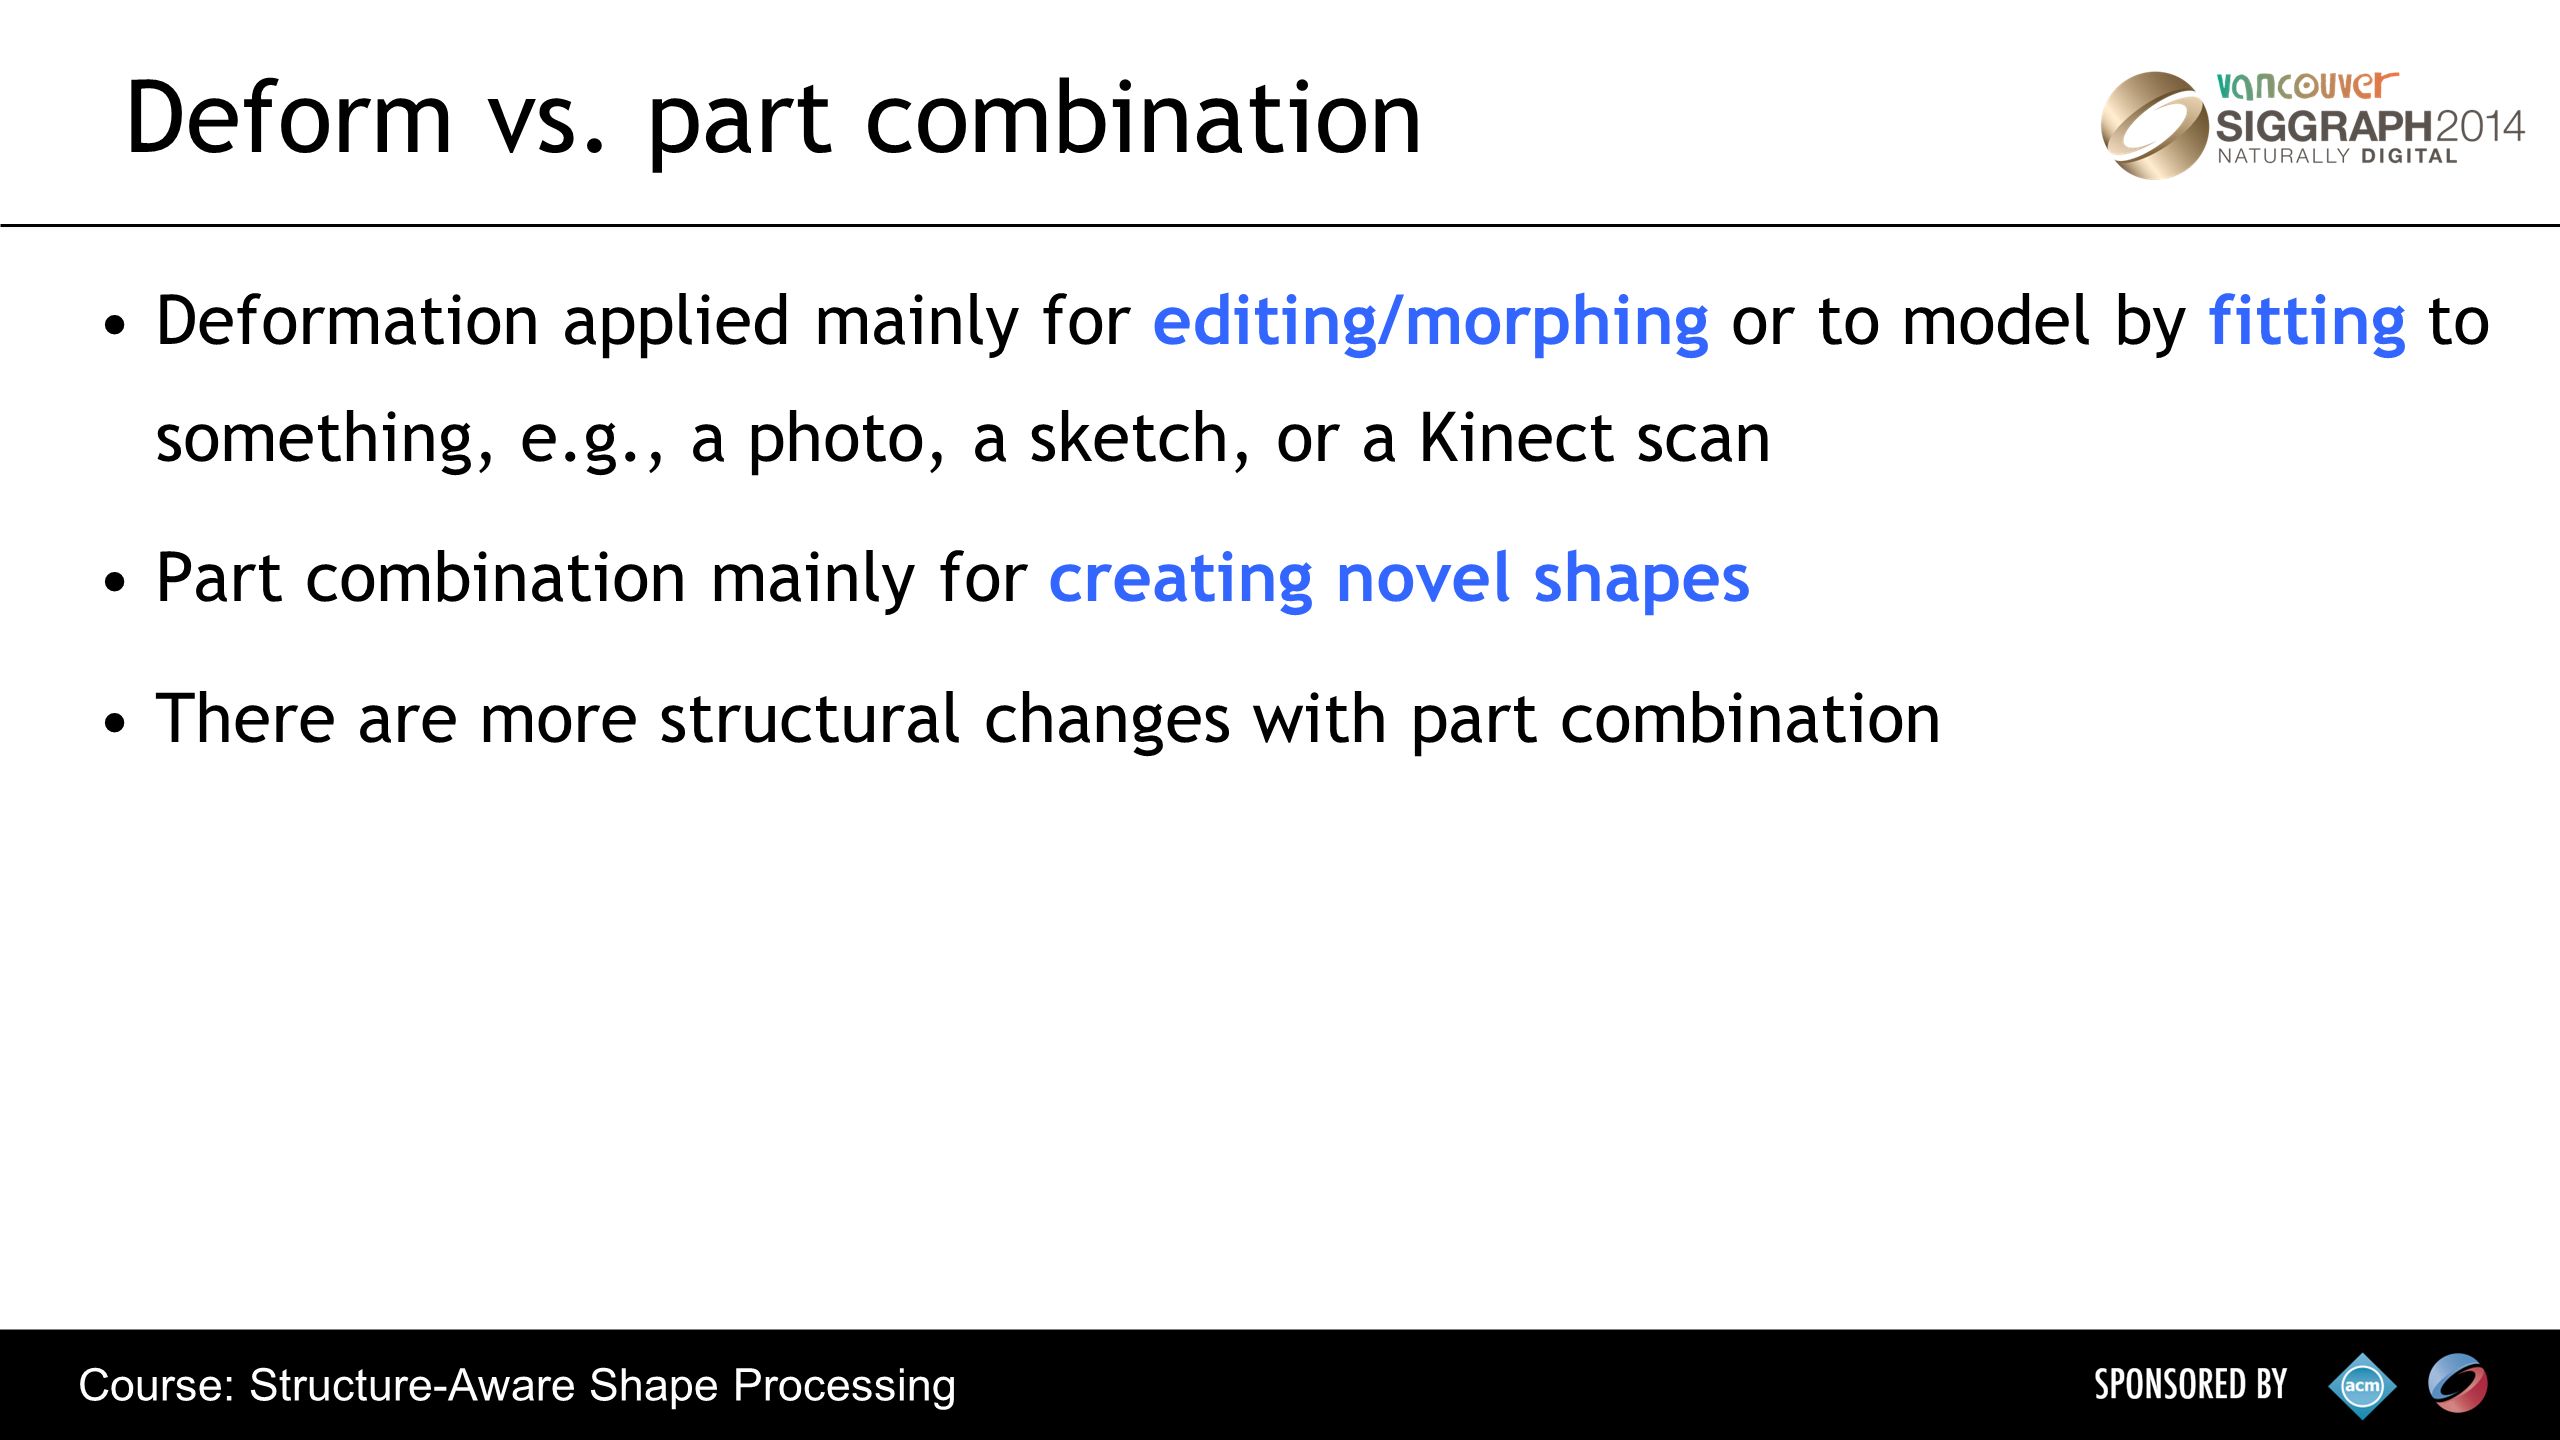 Course: Structure-Aware Shape Processing Deformation applied mainly for editing/morphing or to model by fitting to something, e.g., a photo, a sketch, or a Kinect scan Part combination mainly for creating novel shapes There are more structural changes with part combination Deform vs.